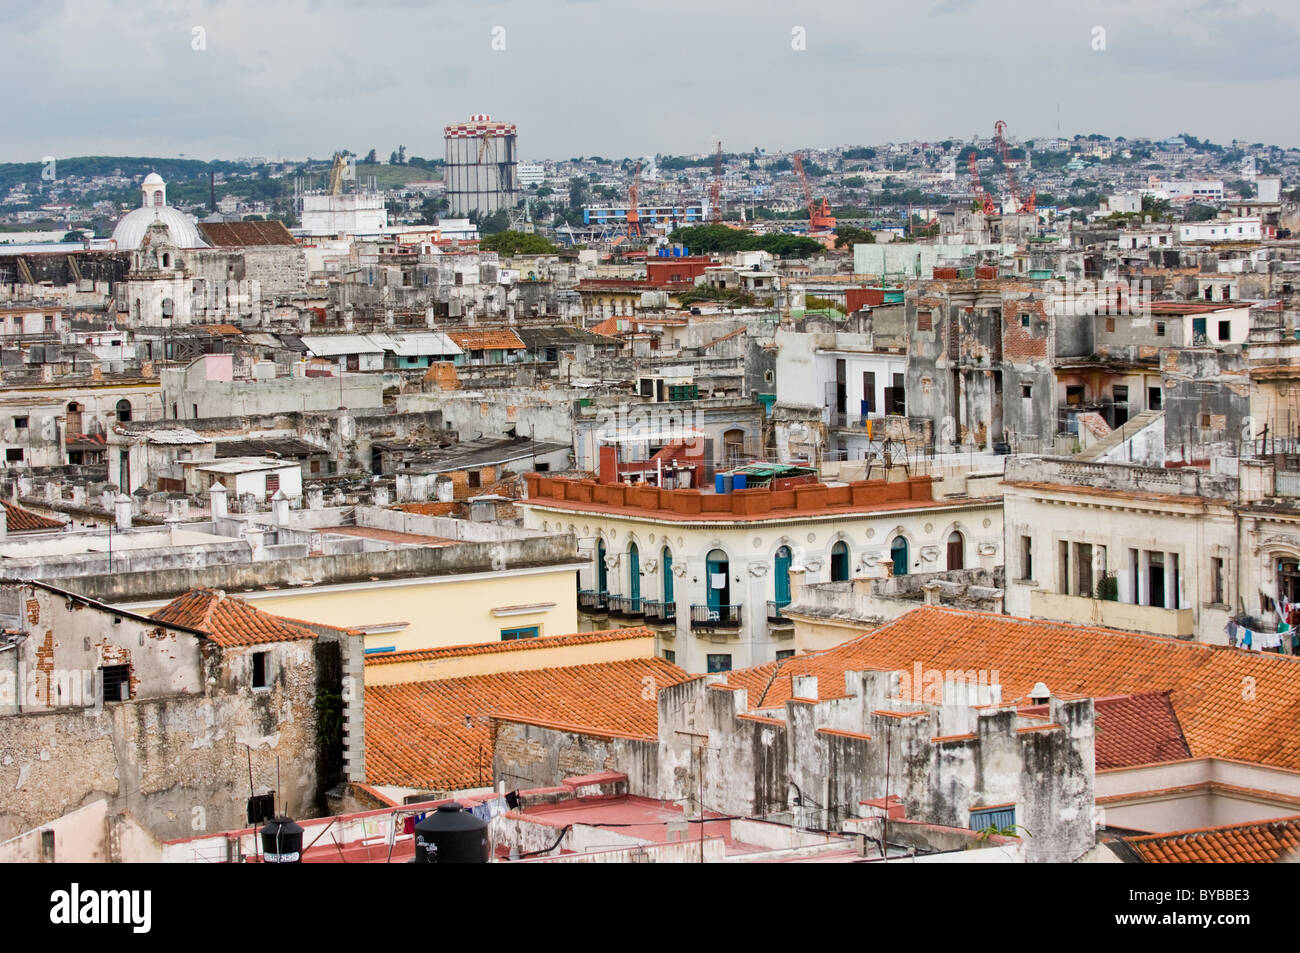 A cityscape rooftop view of the city of Havana Cuba in the Caribbean showing colonial buildings Stock Photo